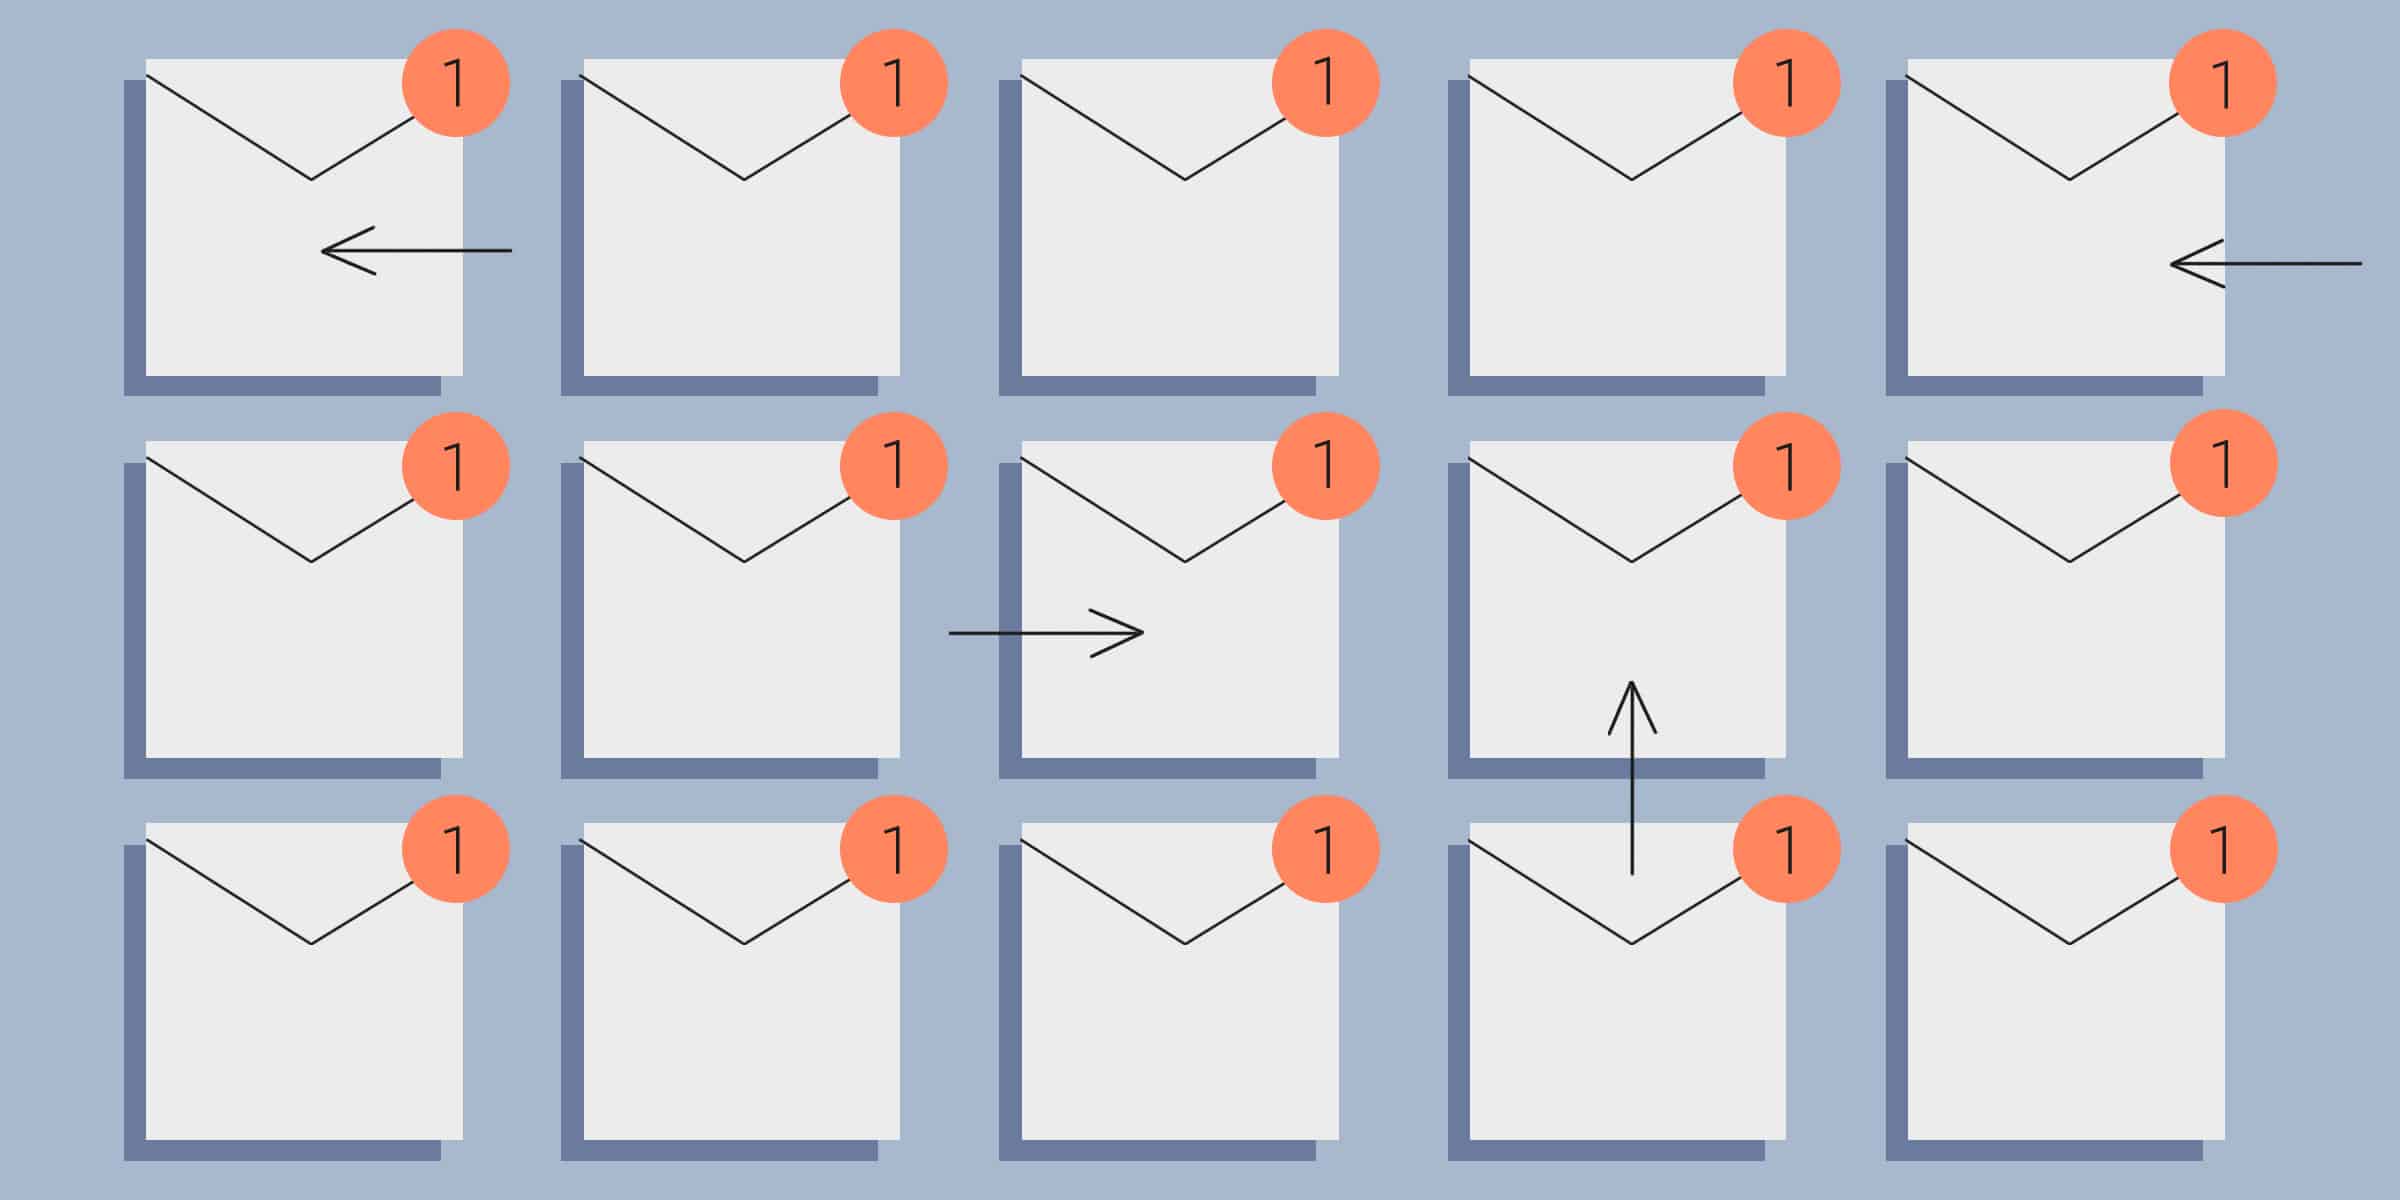 Don’t Look Away: Your Email Data is a Hidden Gem